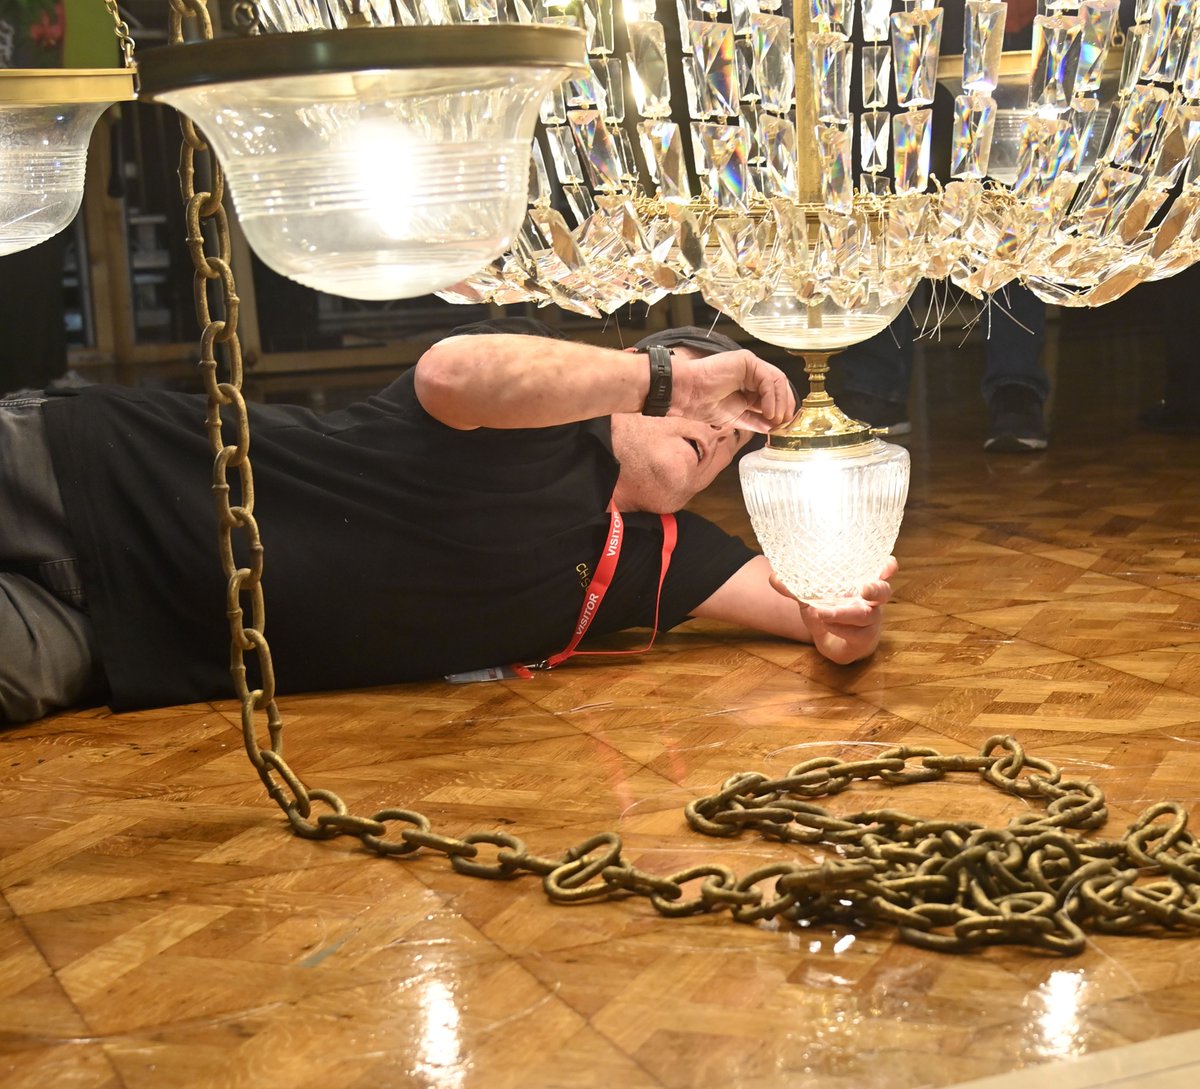 The Empress Ballroom's chandeliers, dating back to the wartime era, have been beautifully restored for the first time since 2017. The ballroom now shines brighter than ever as it prepares to host over 2,000 dancers at the upcoming Dance Festival. ℹ️ bit.ly/wintergardensc…